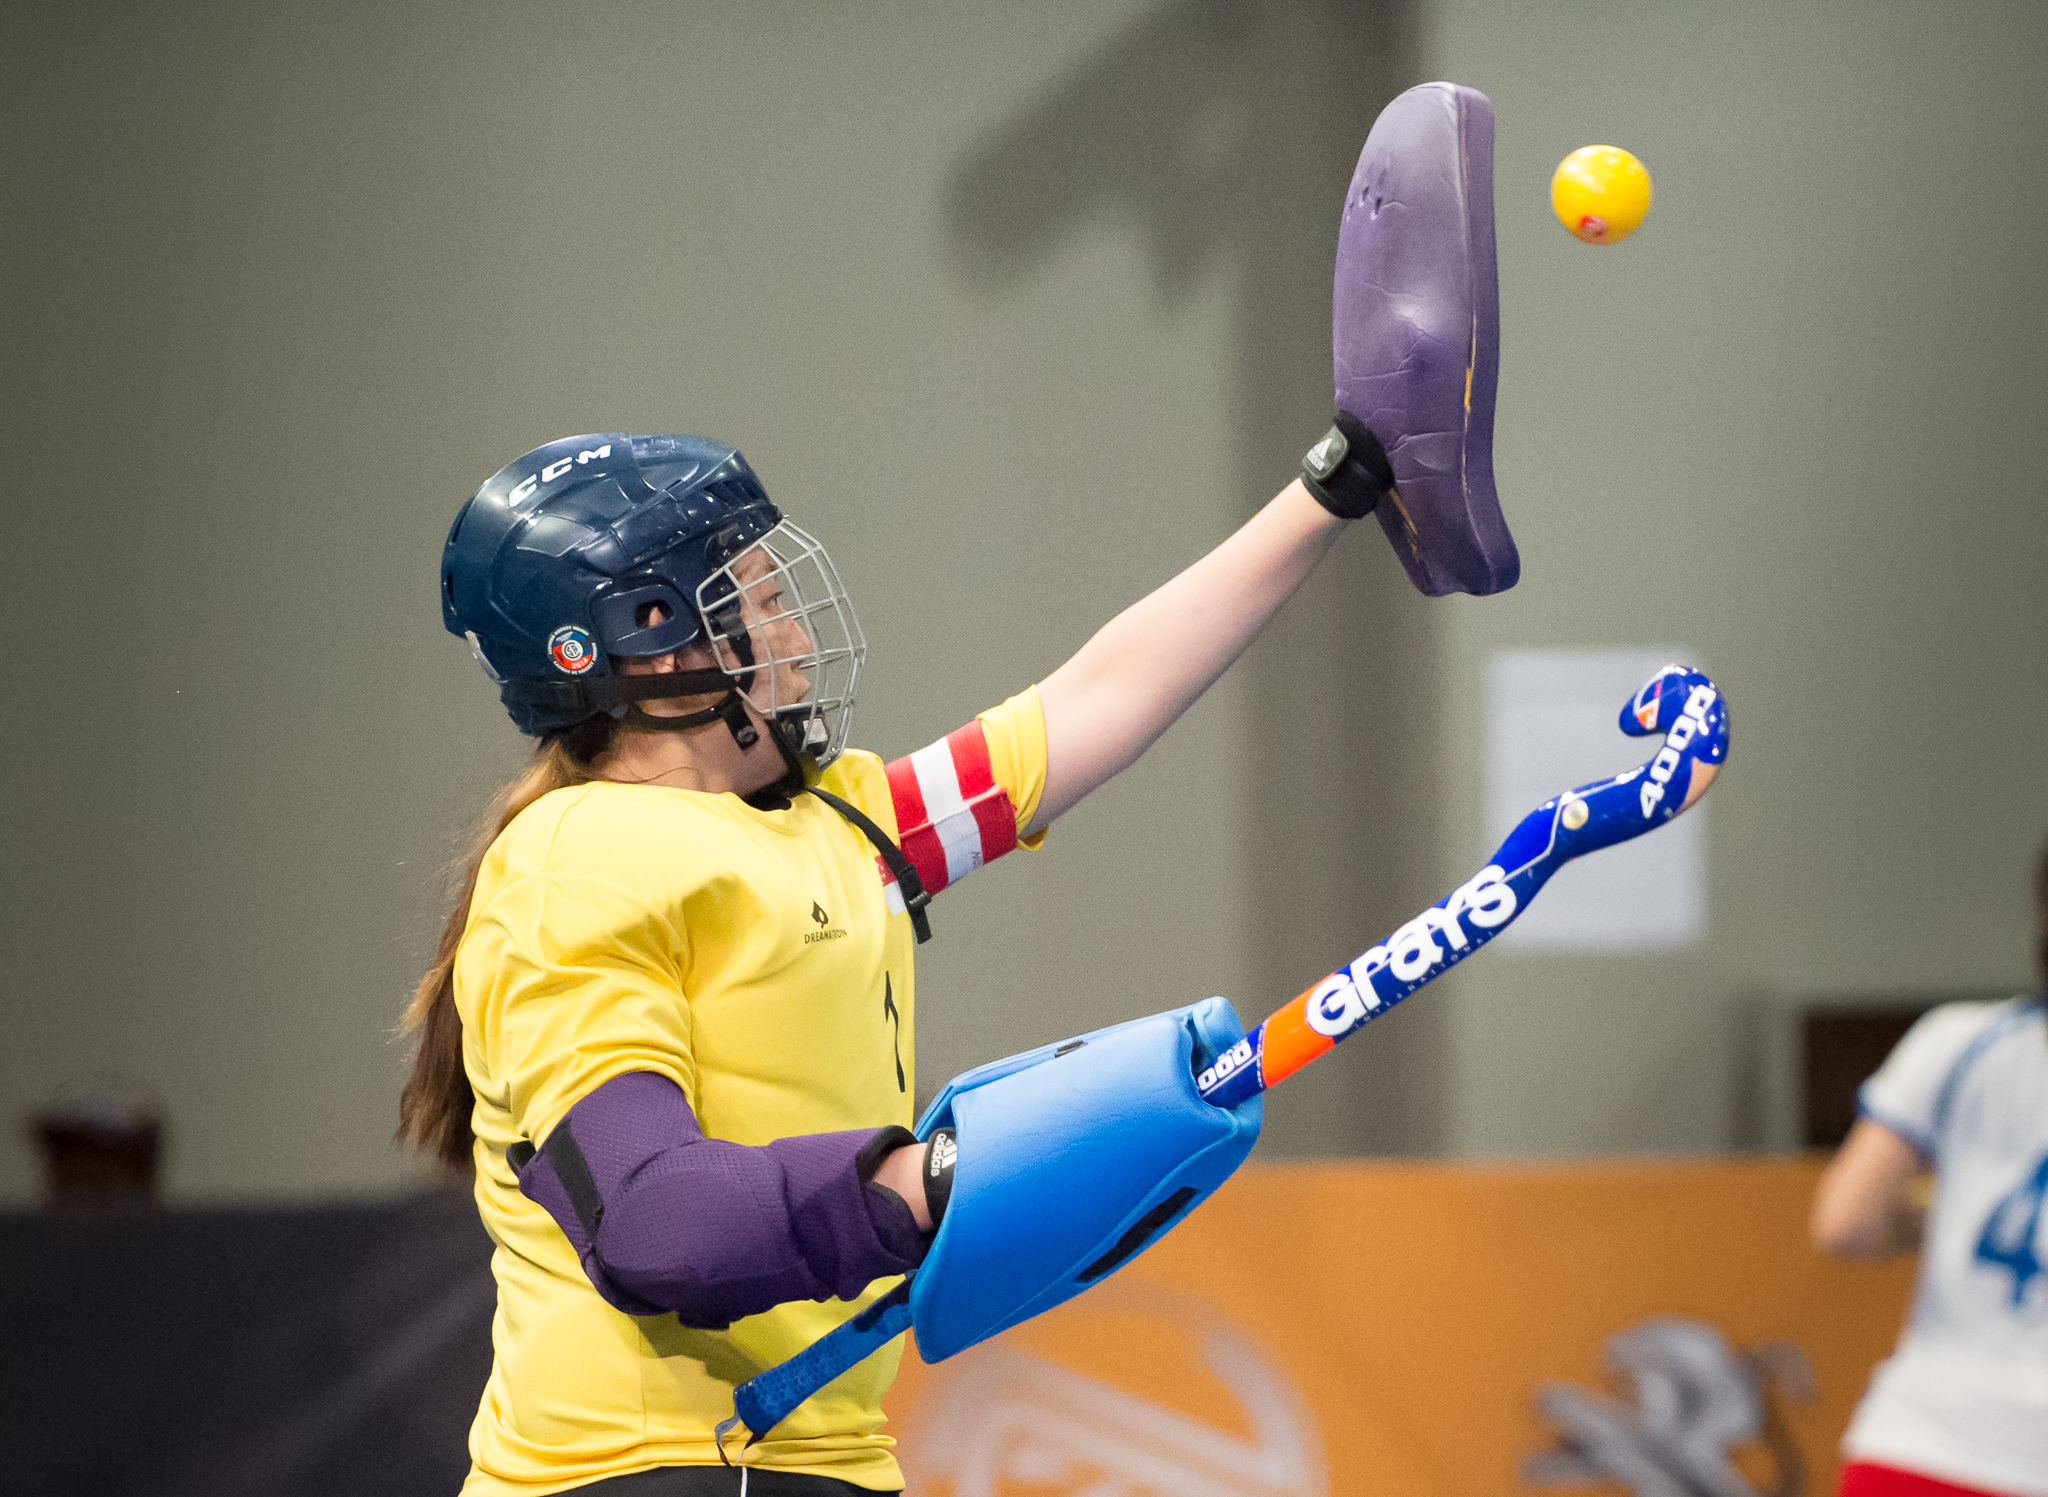 A Singaporean hockey goal keeper prepares to catch the ball during the SEA Games at the Malaysian International Trade and Exhibition Centre.